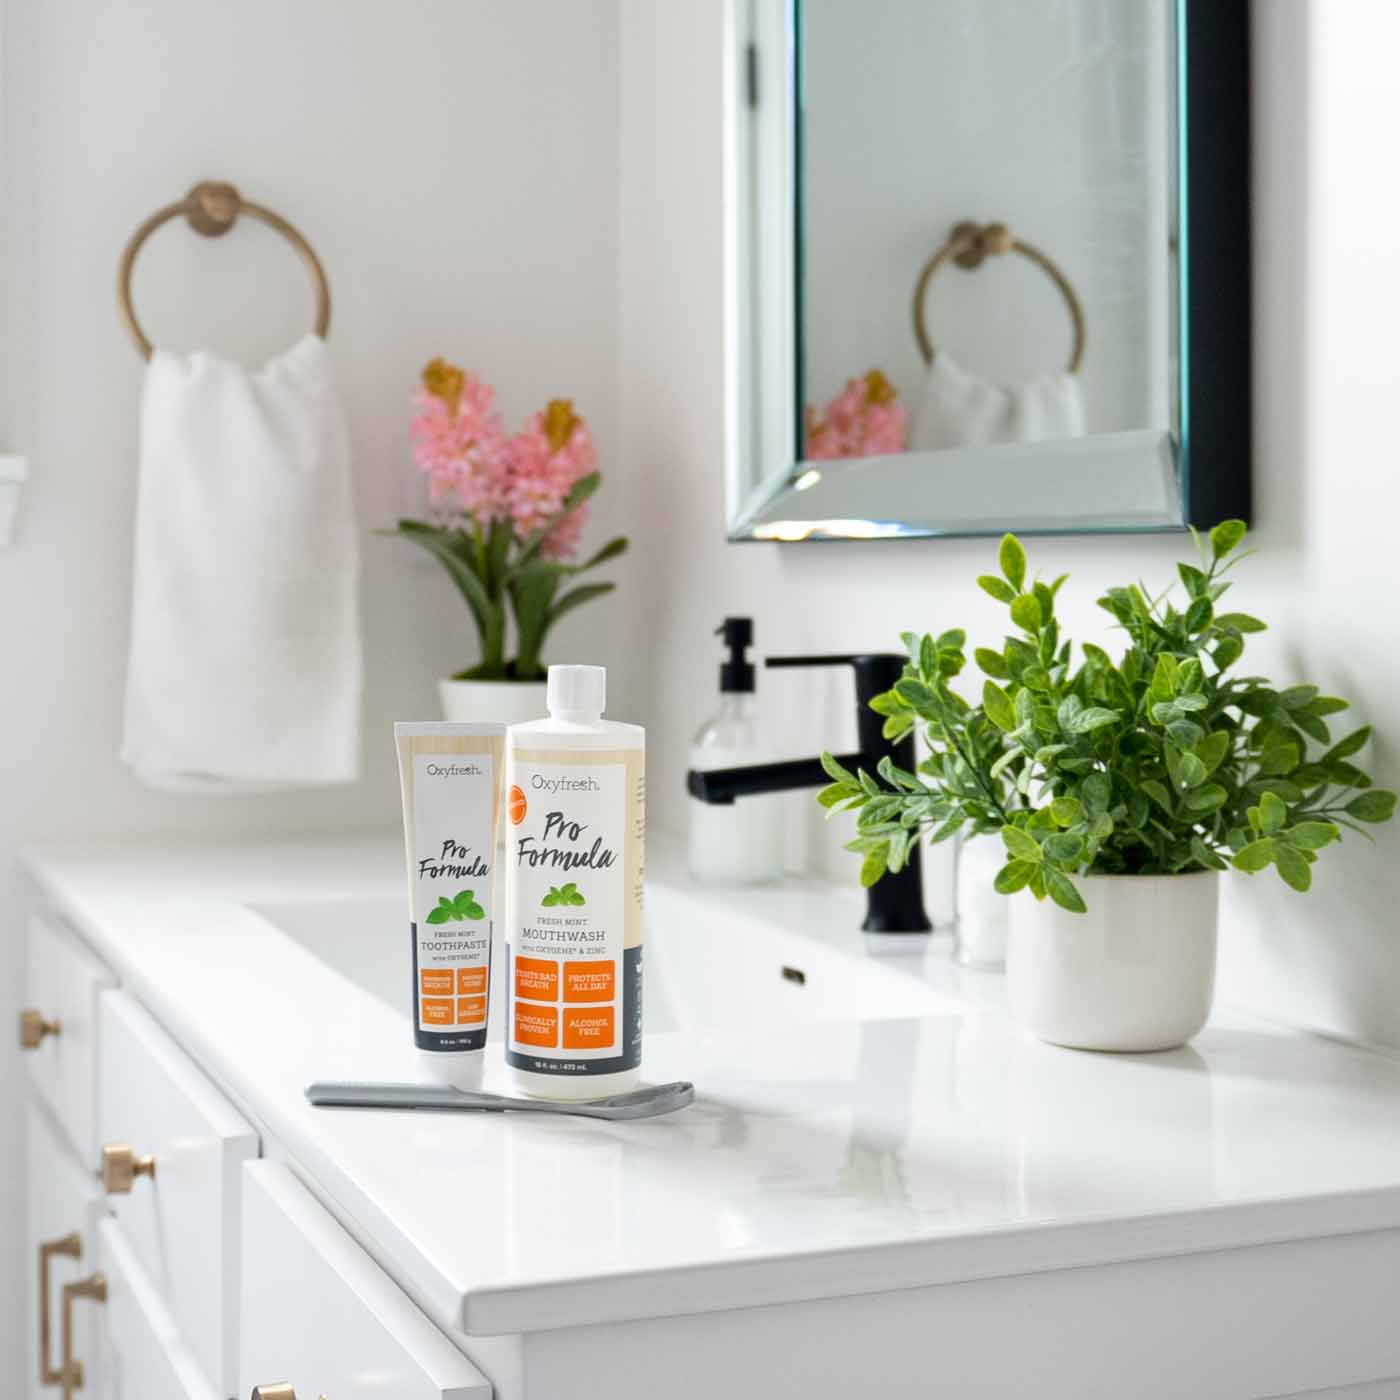 Pro-formula-system-including-pro-formula-mouthwash-with-zinc-and-freshmint-toothpaste-along-with-an-oolitt-tongue-scraper-on-countertop-in-beautiful-white-bathroom